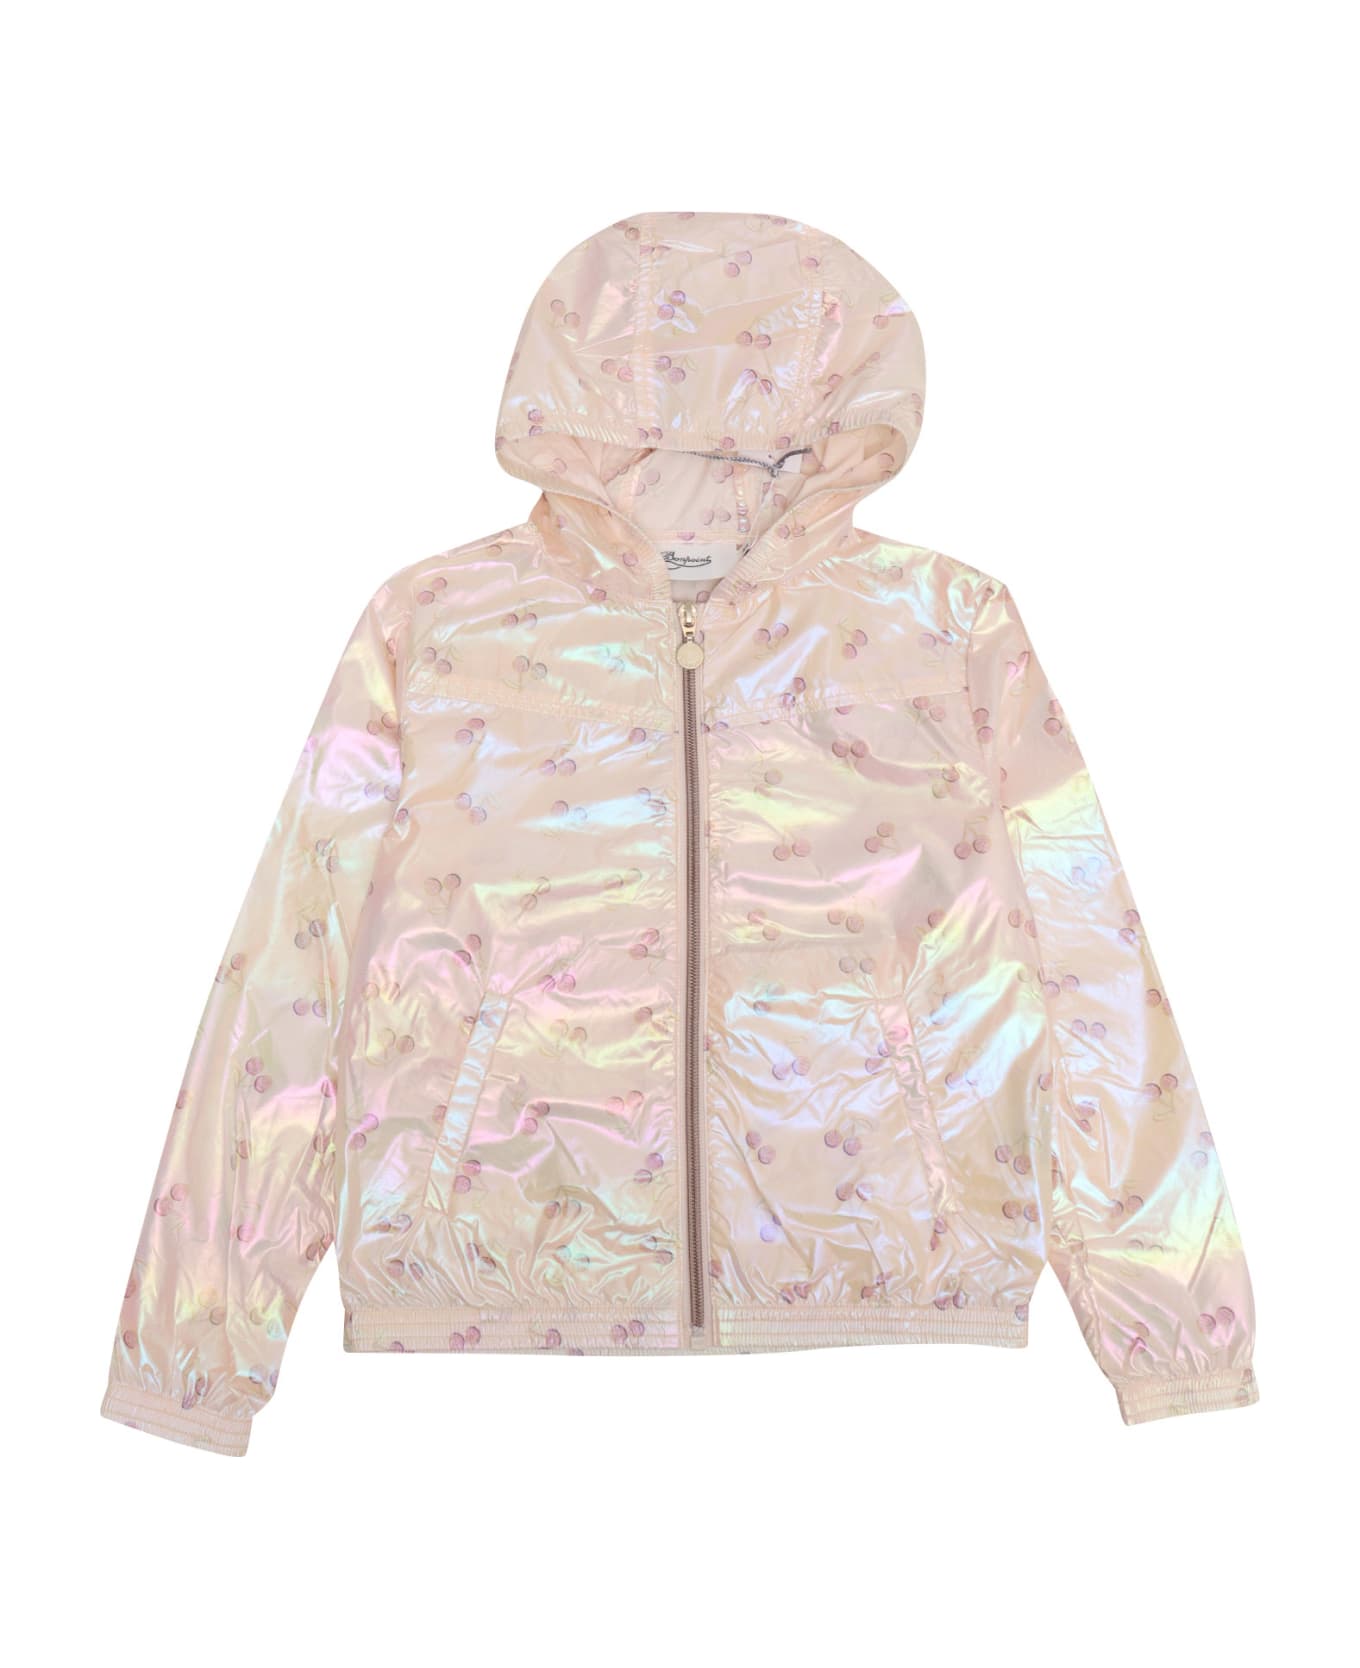 Bonpoint Jacket With Cherry Pattern - PINK